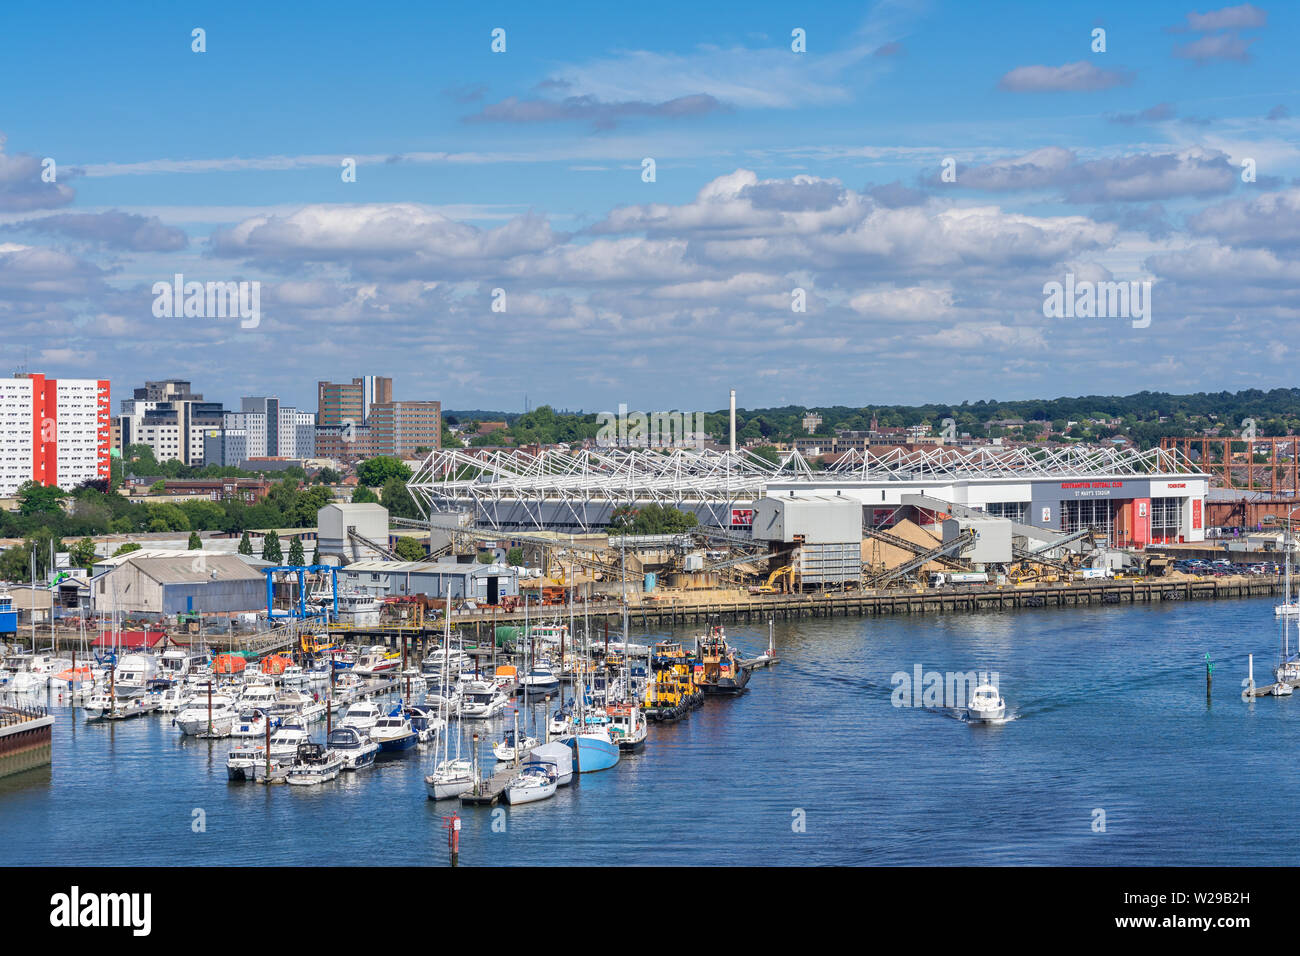 Boats towed along the Itchen river with the St Mary's football stadium in the background, view from Itchen bridge, Southampton, England, UK Stock Photo